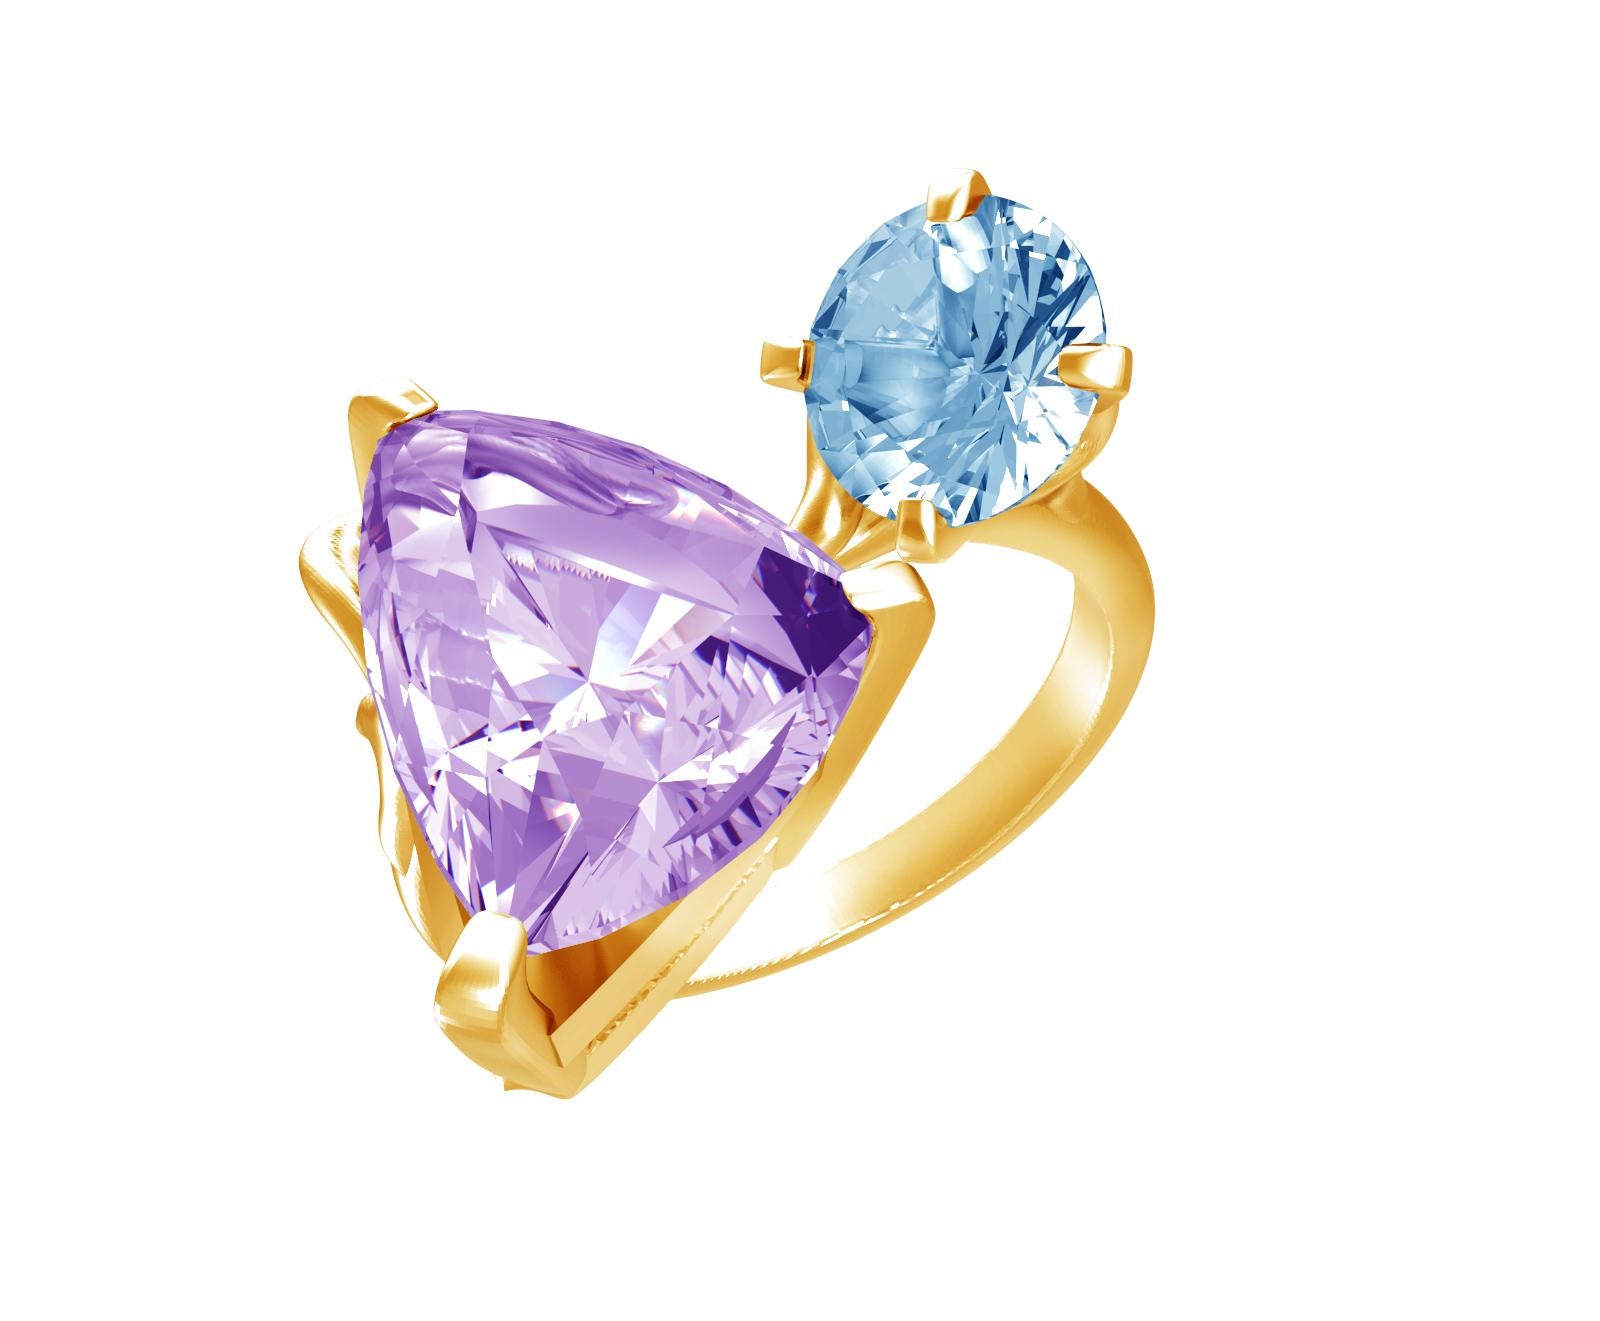 This contemporary engagement ring is made of 18 karat yellow gold with trillion cut amethyst and blue round cut paraiba tourmaline. The unusual angle of the gems placement makes it look even bigger, as a perfect cocktail ring. 

The ring will be